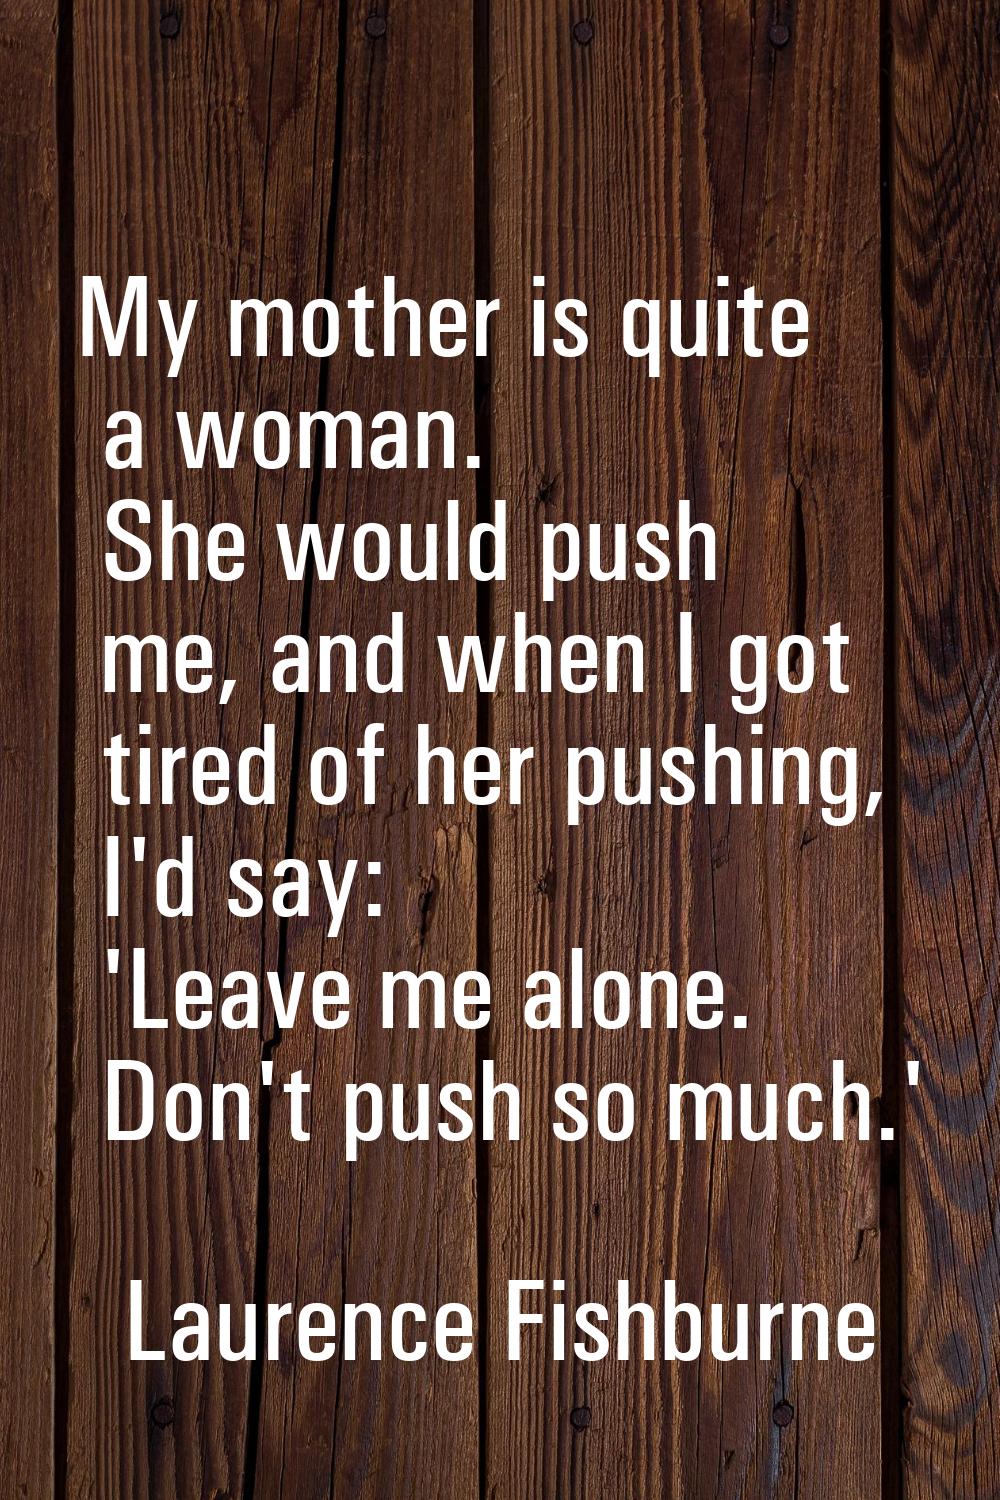 My mother is quite a woman. She would push me, and when I got tired of her pushing, I'd say: 'Leave